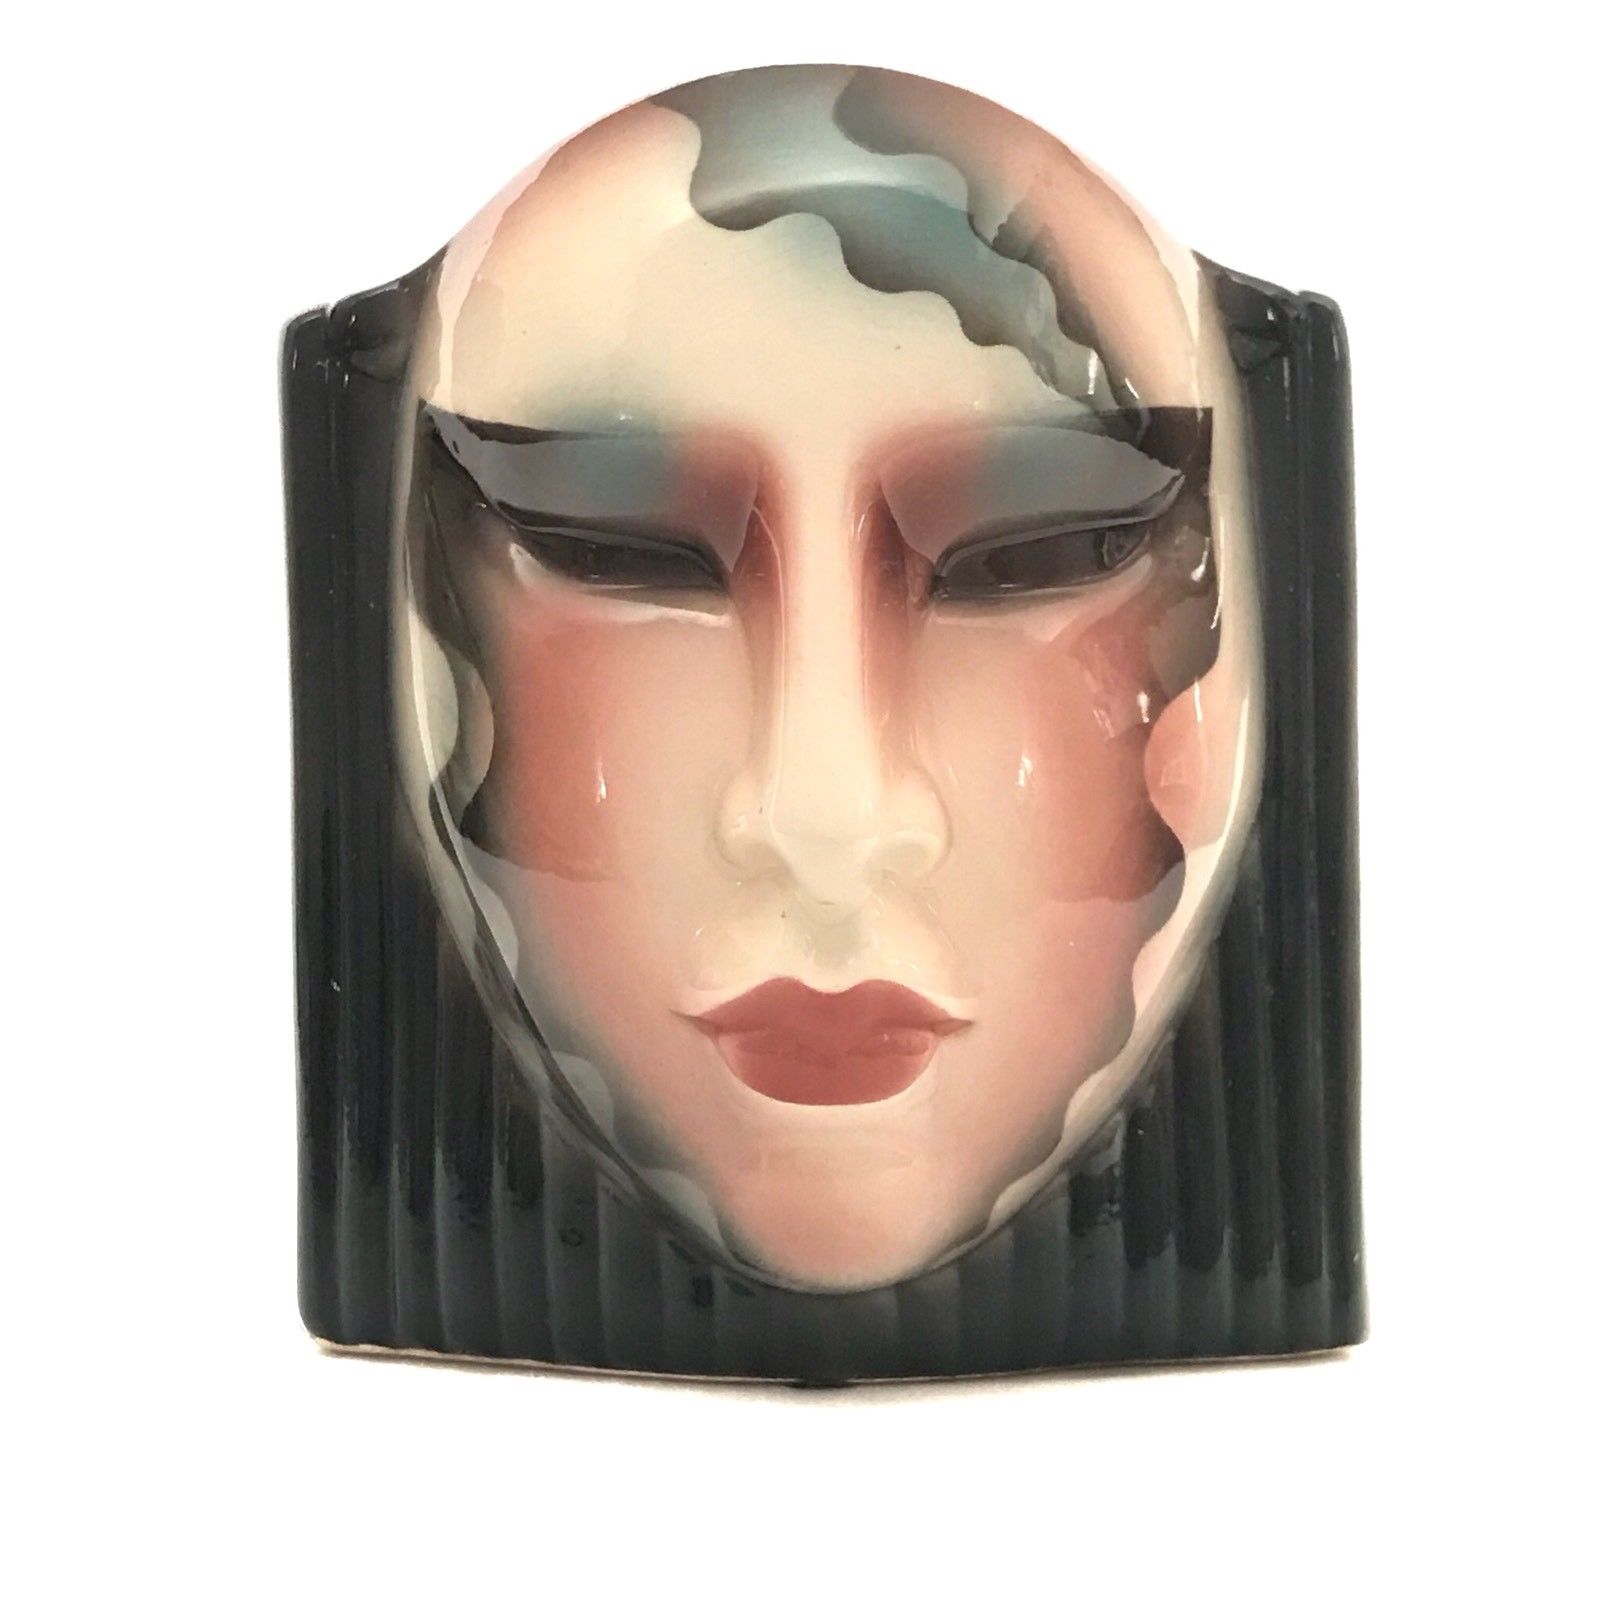 ABOUT FACE By Clay Art SF 80s Art Deco Woman's Face Vase Planter ...